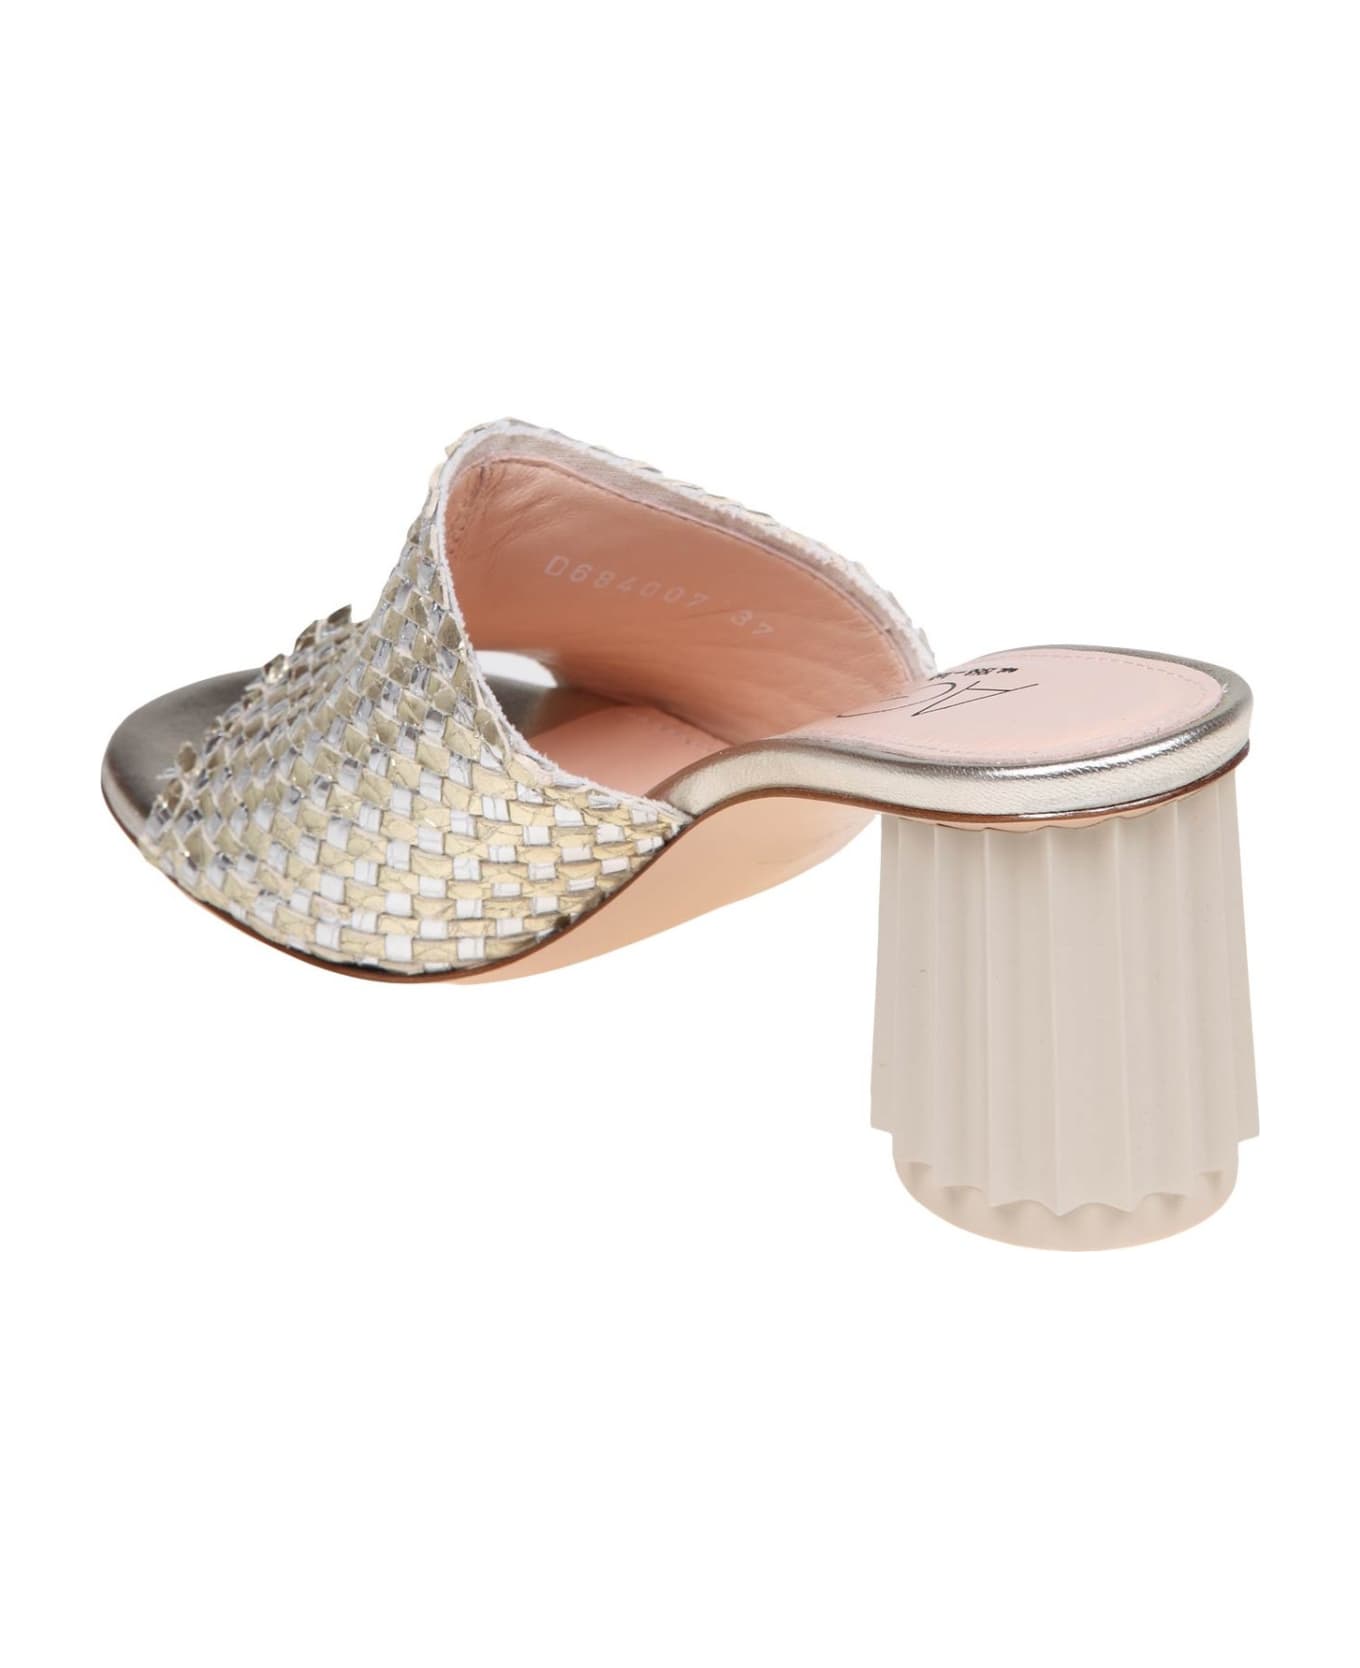 AGL Dorica Slides In Silver And Gold Woven Leather - Silver サンダル